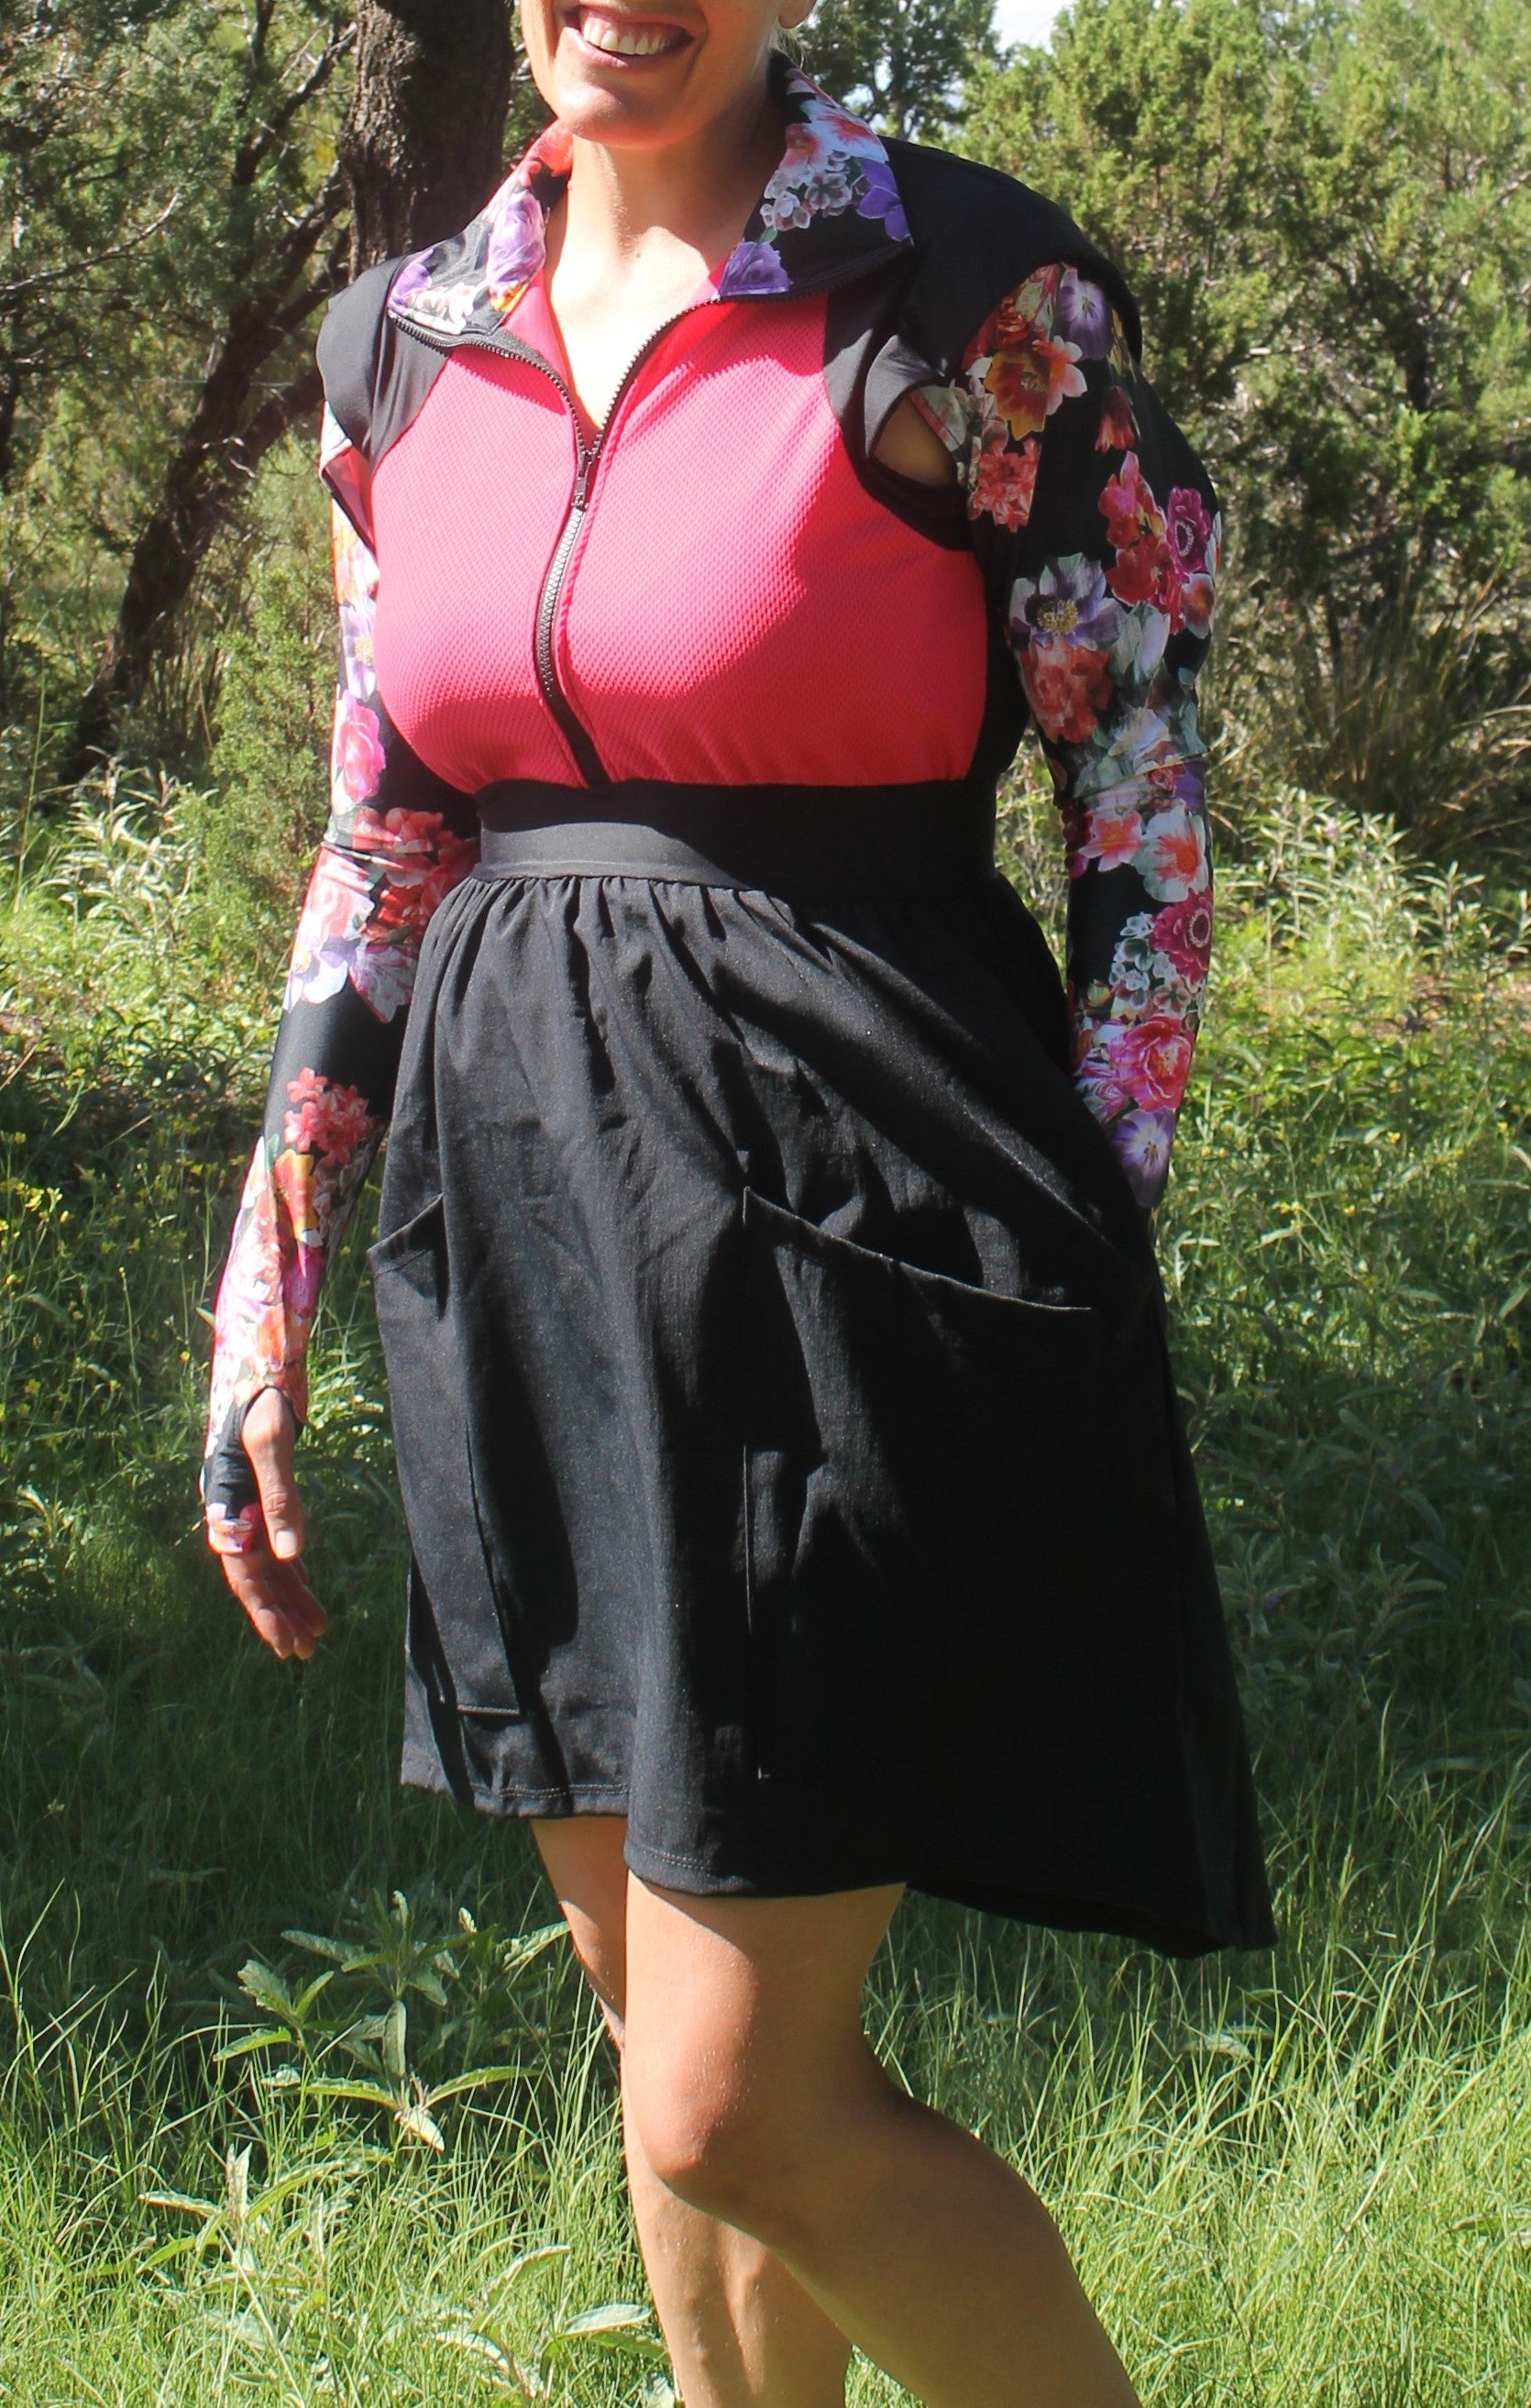 Belle of the Trail Hiking Dress – Lady Hike